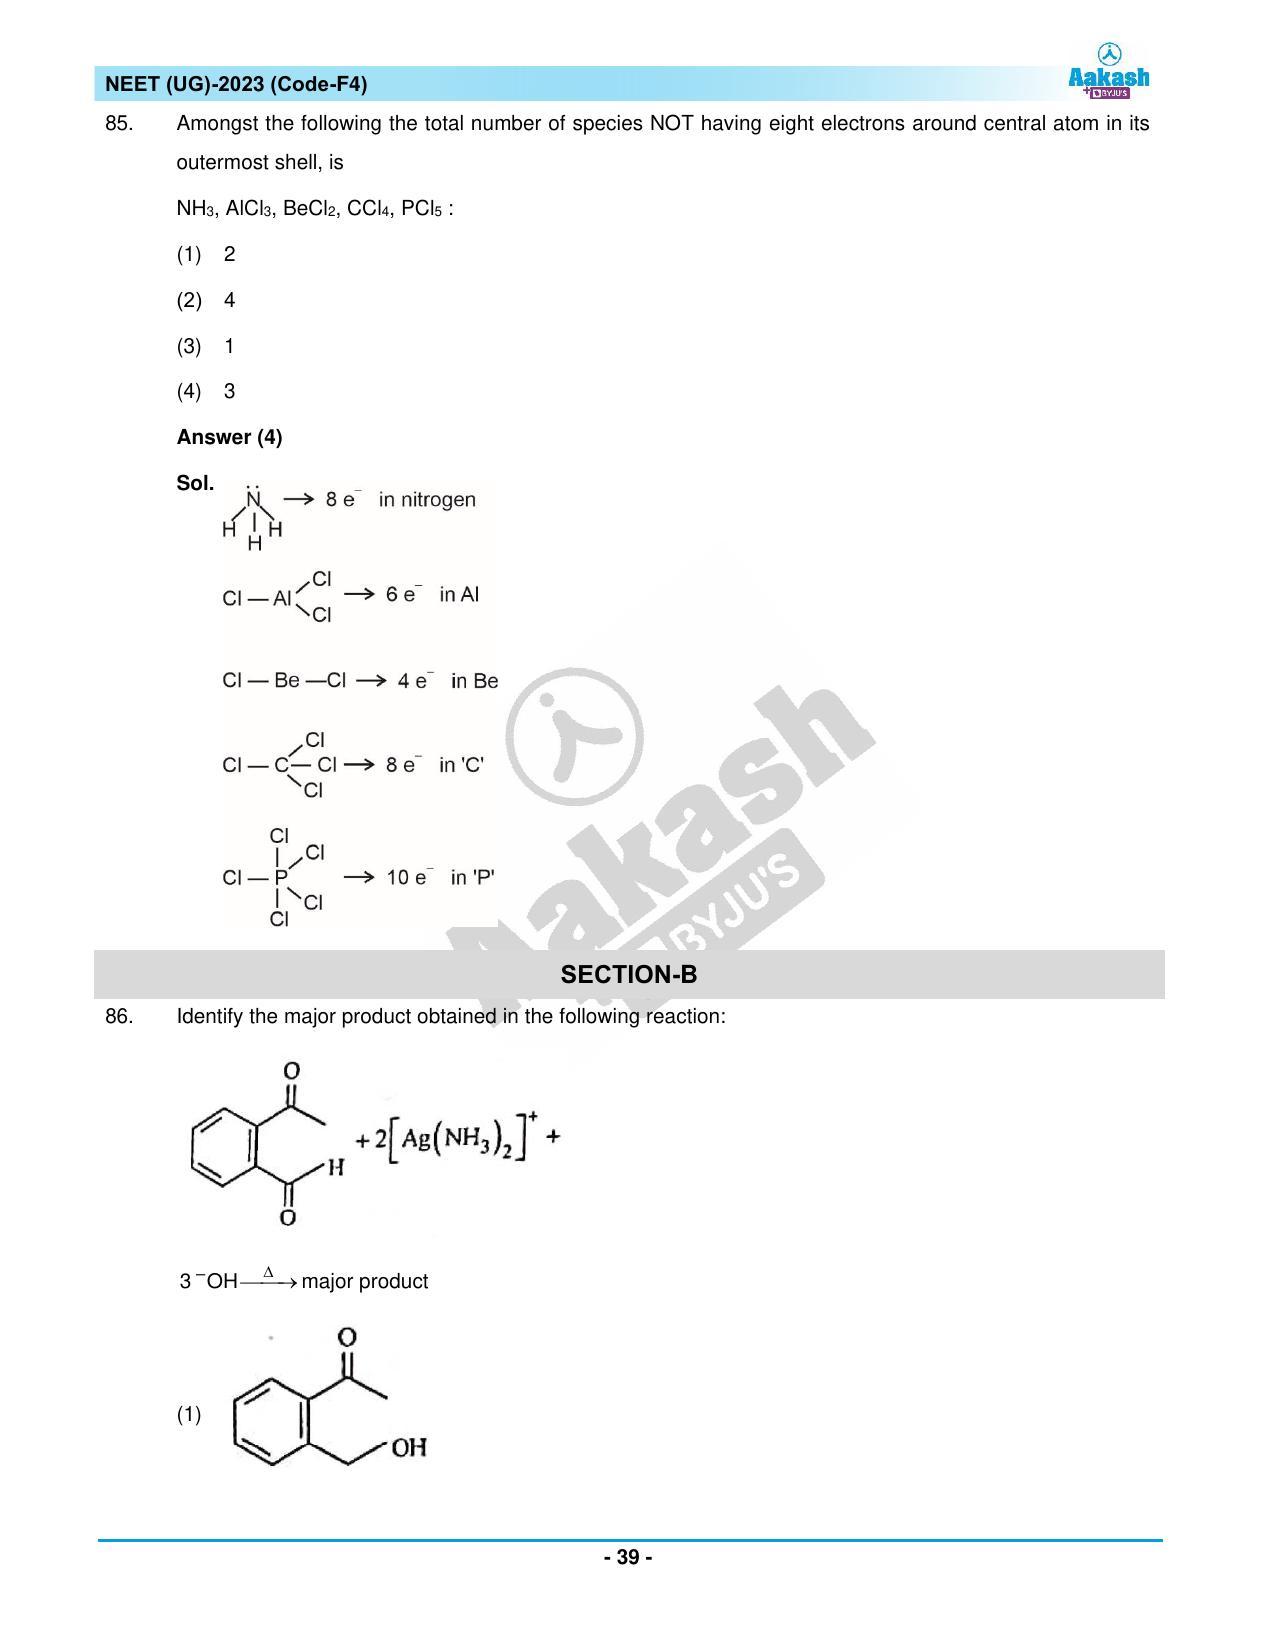 NEET 2023 Question Paper F4 - Page 39